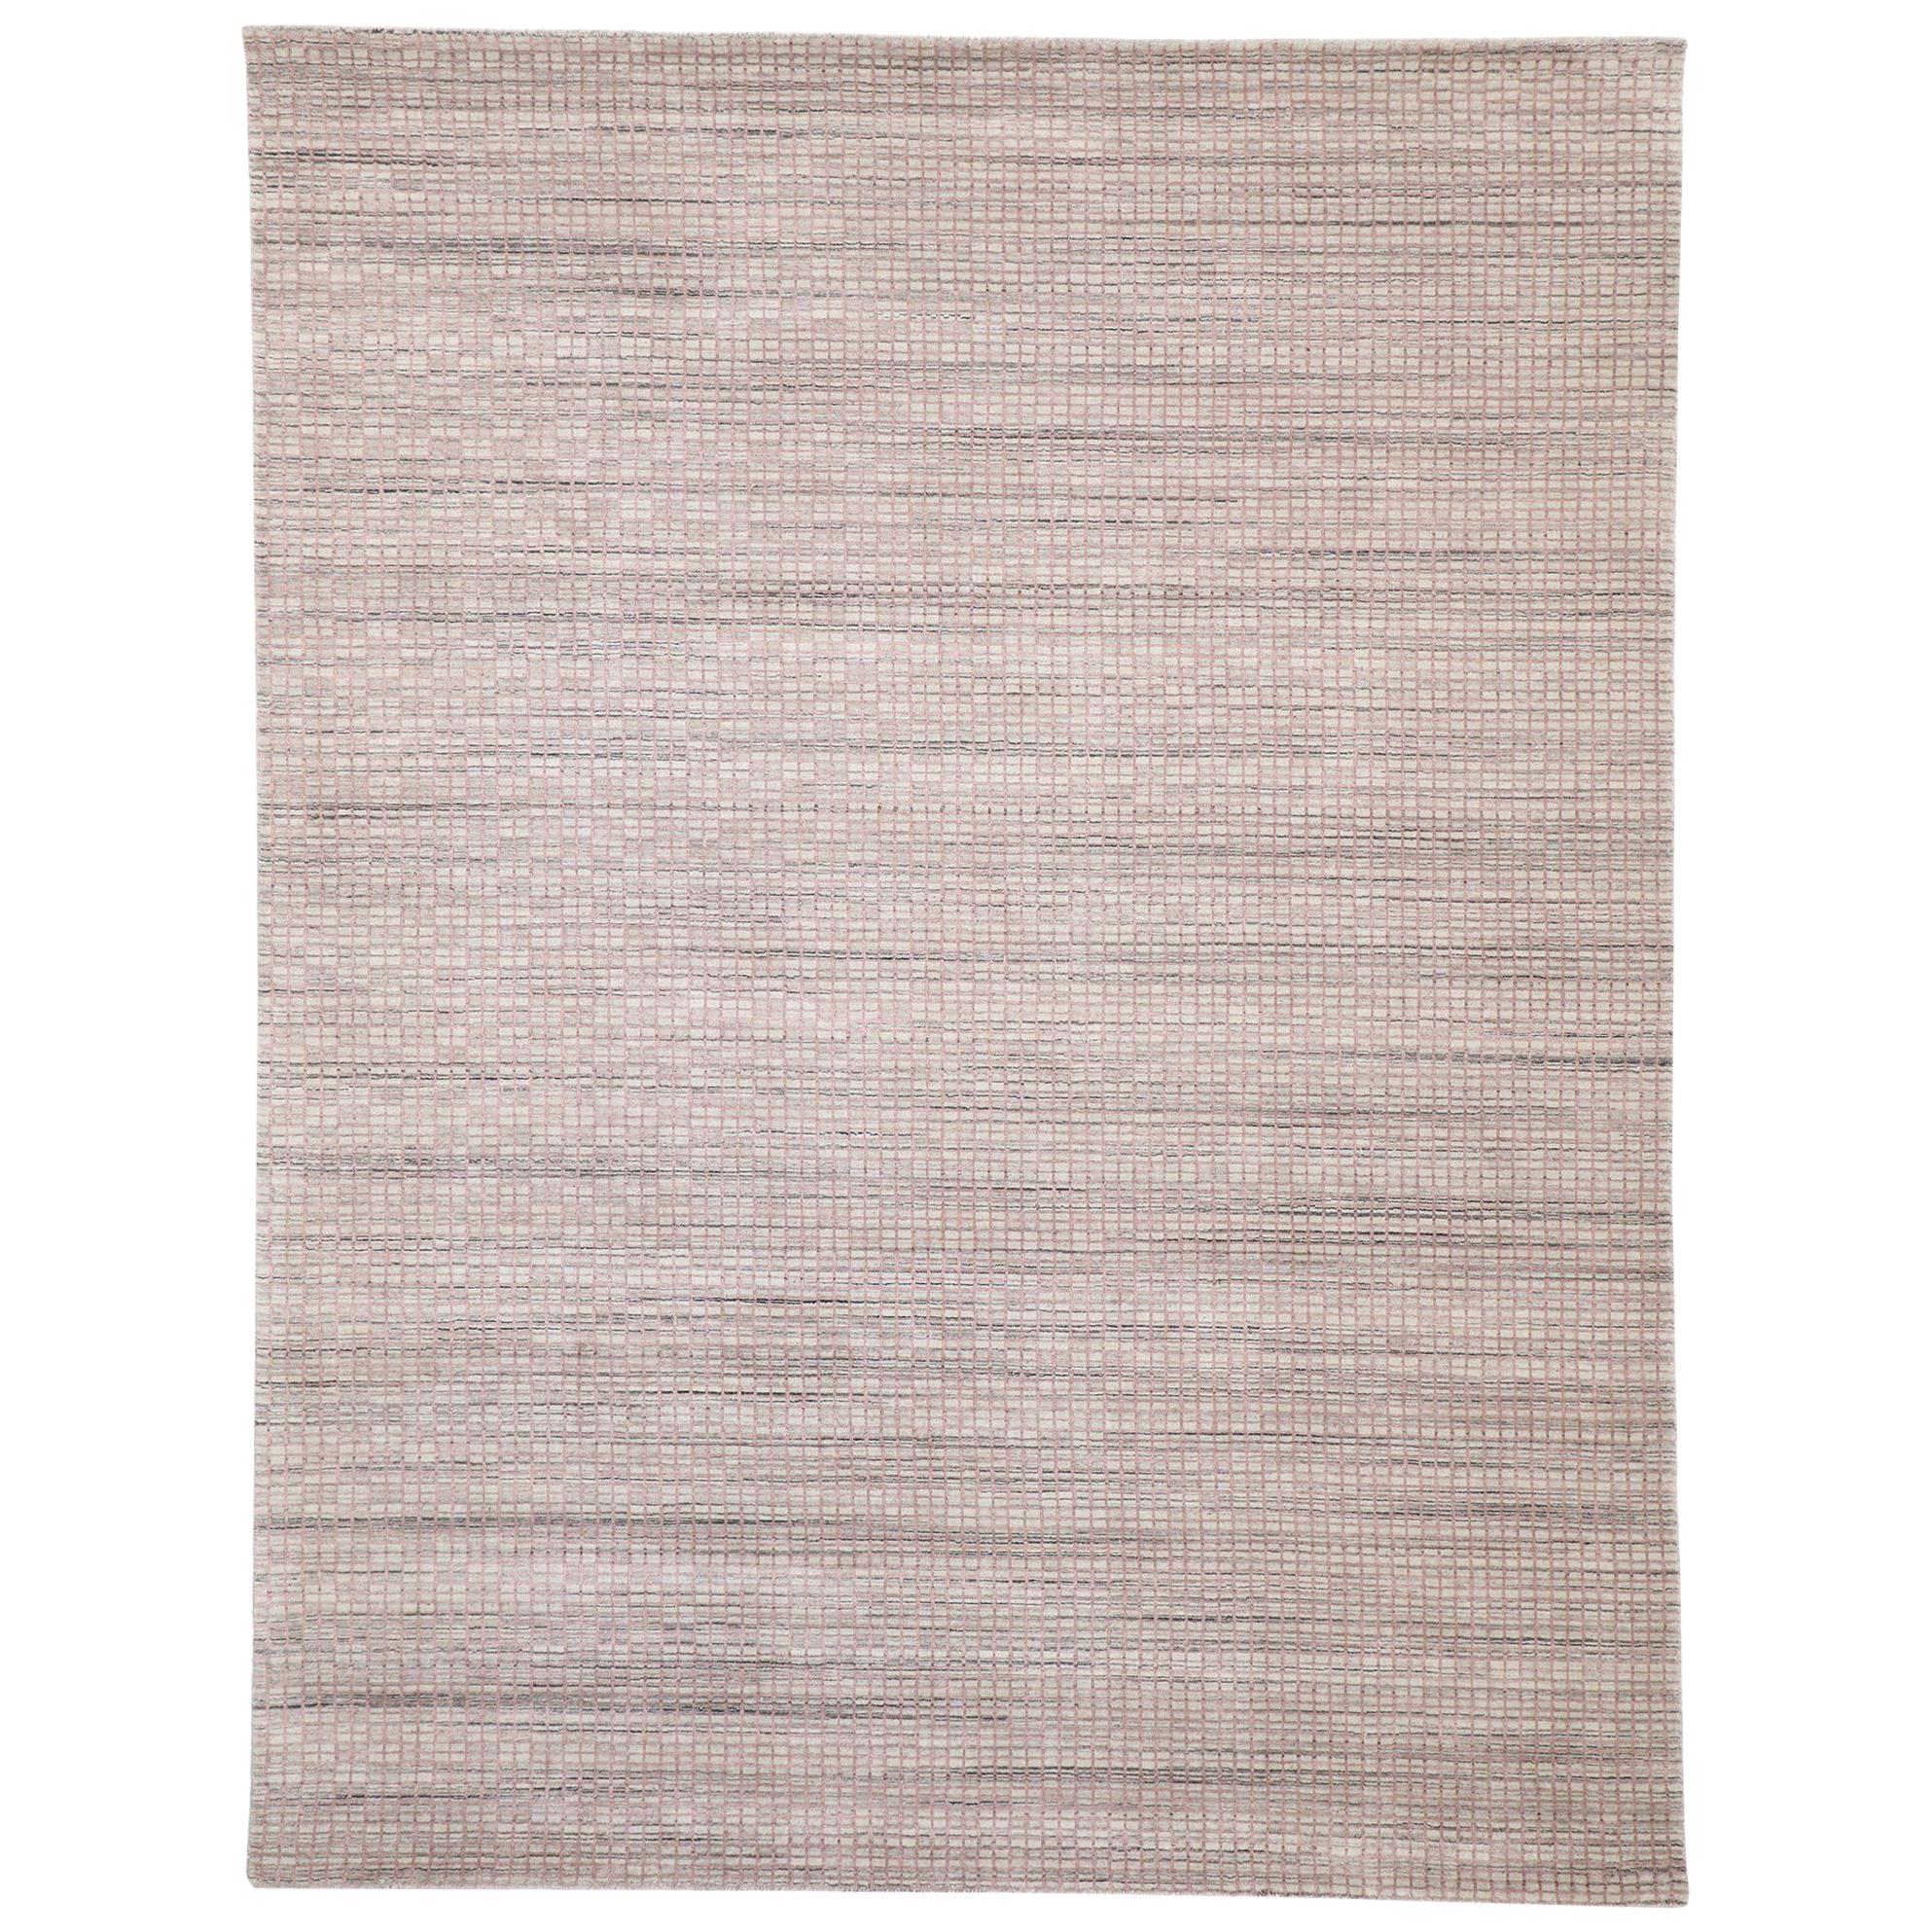 New Transitional Area Rug with Scandinavian Modern Swedish Shabby Chic Style For Sale